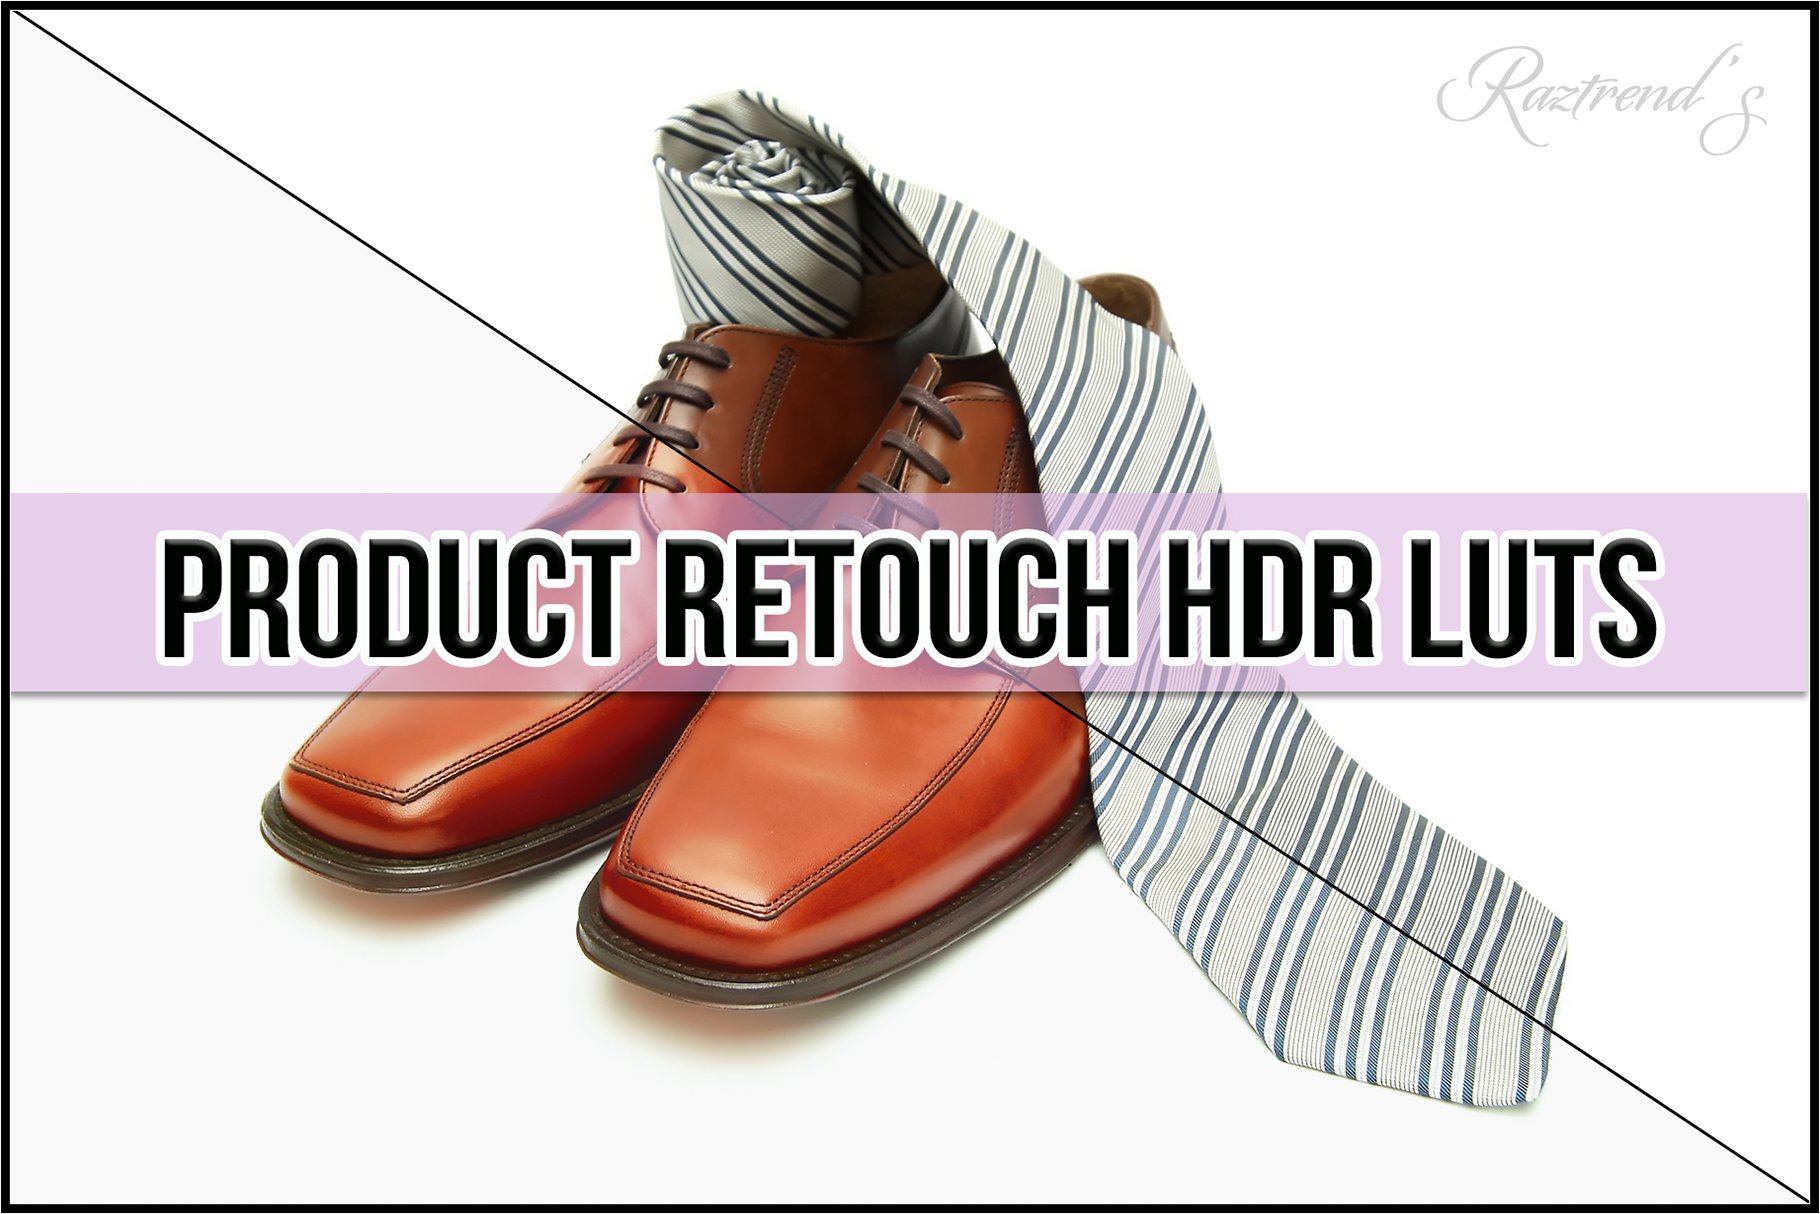 Product Retouch HDR LUTscover image.